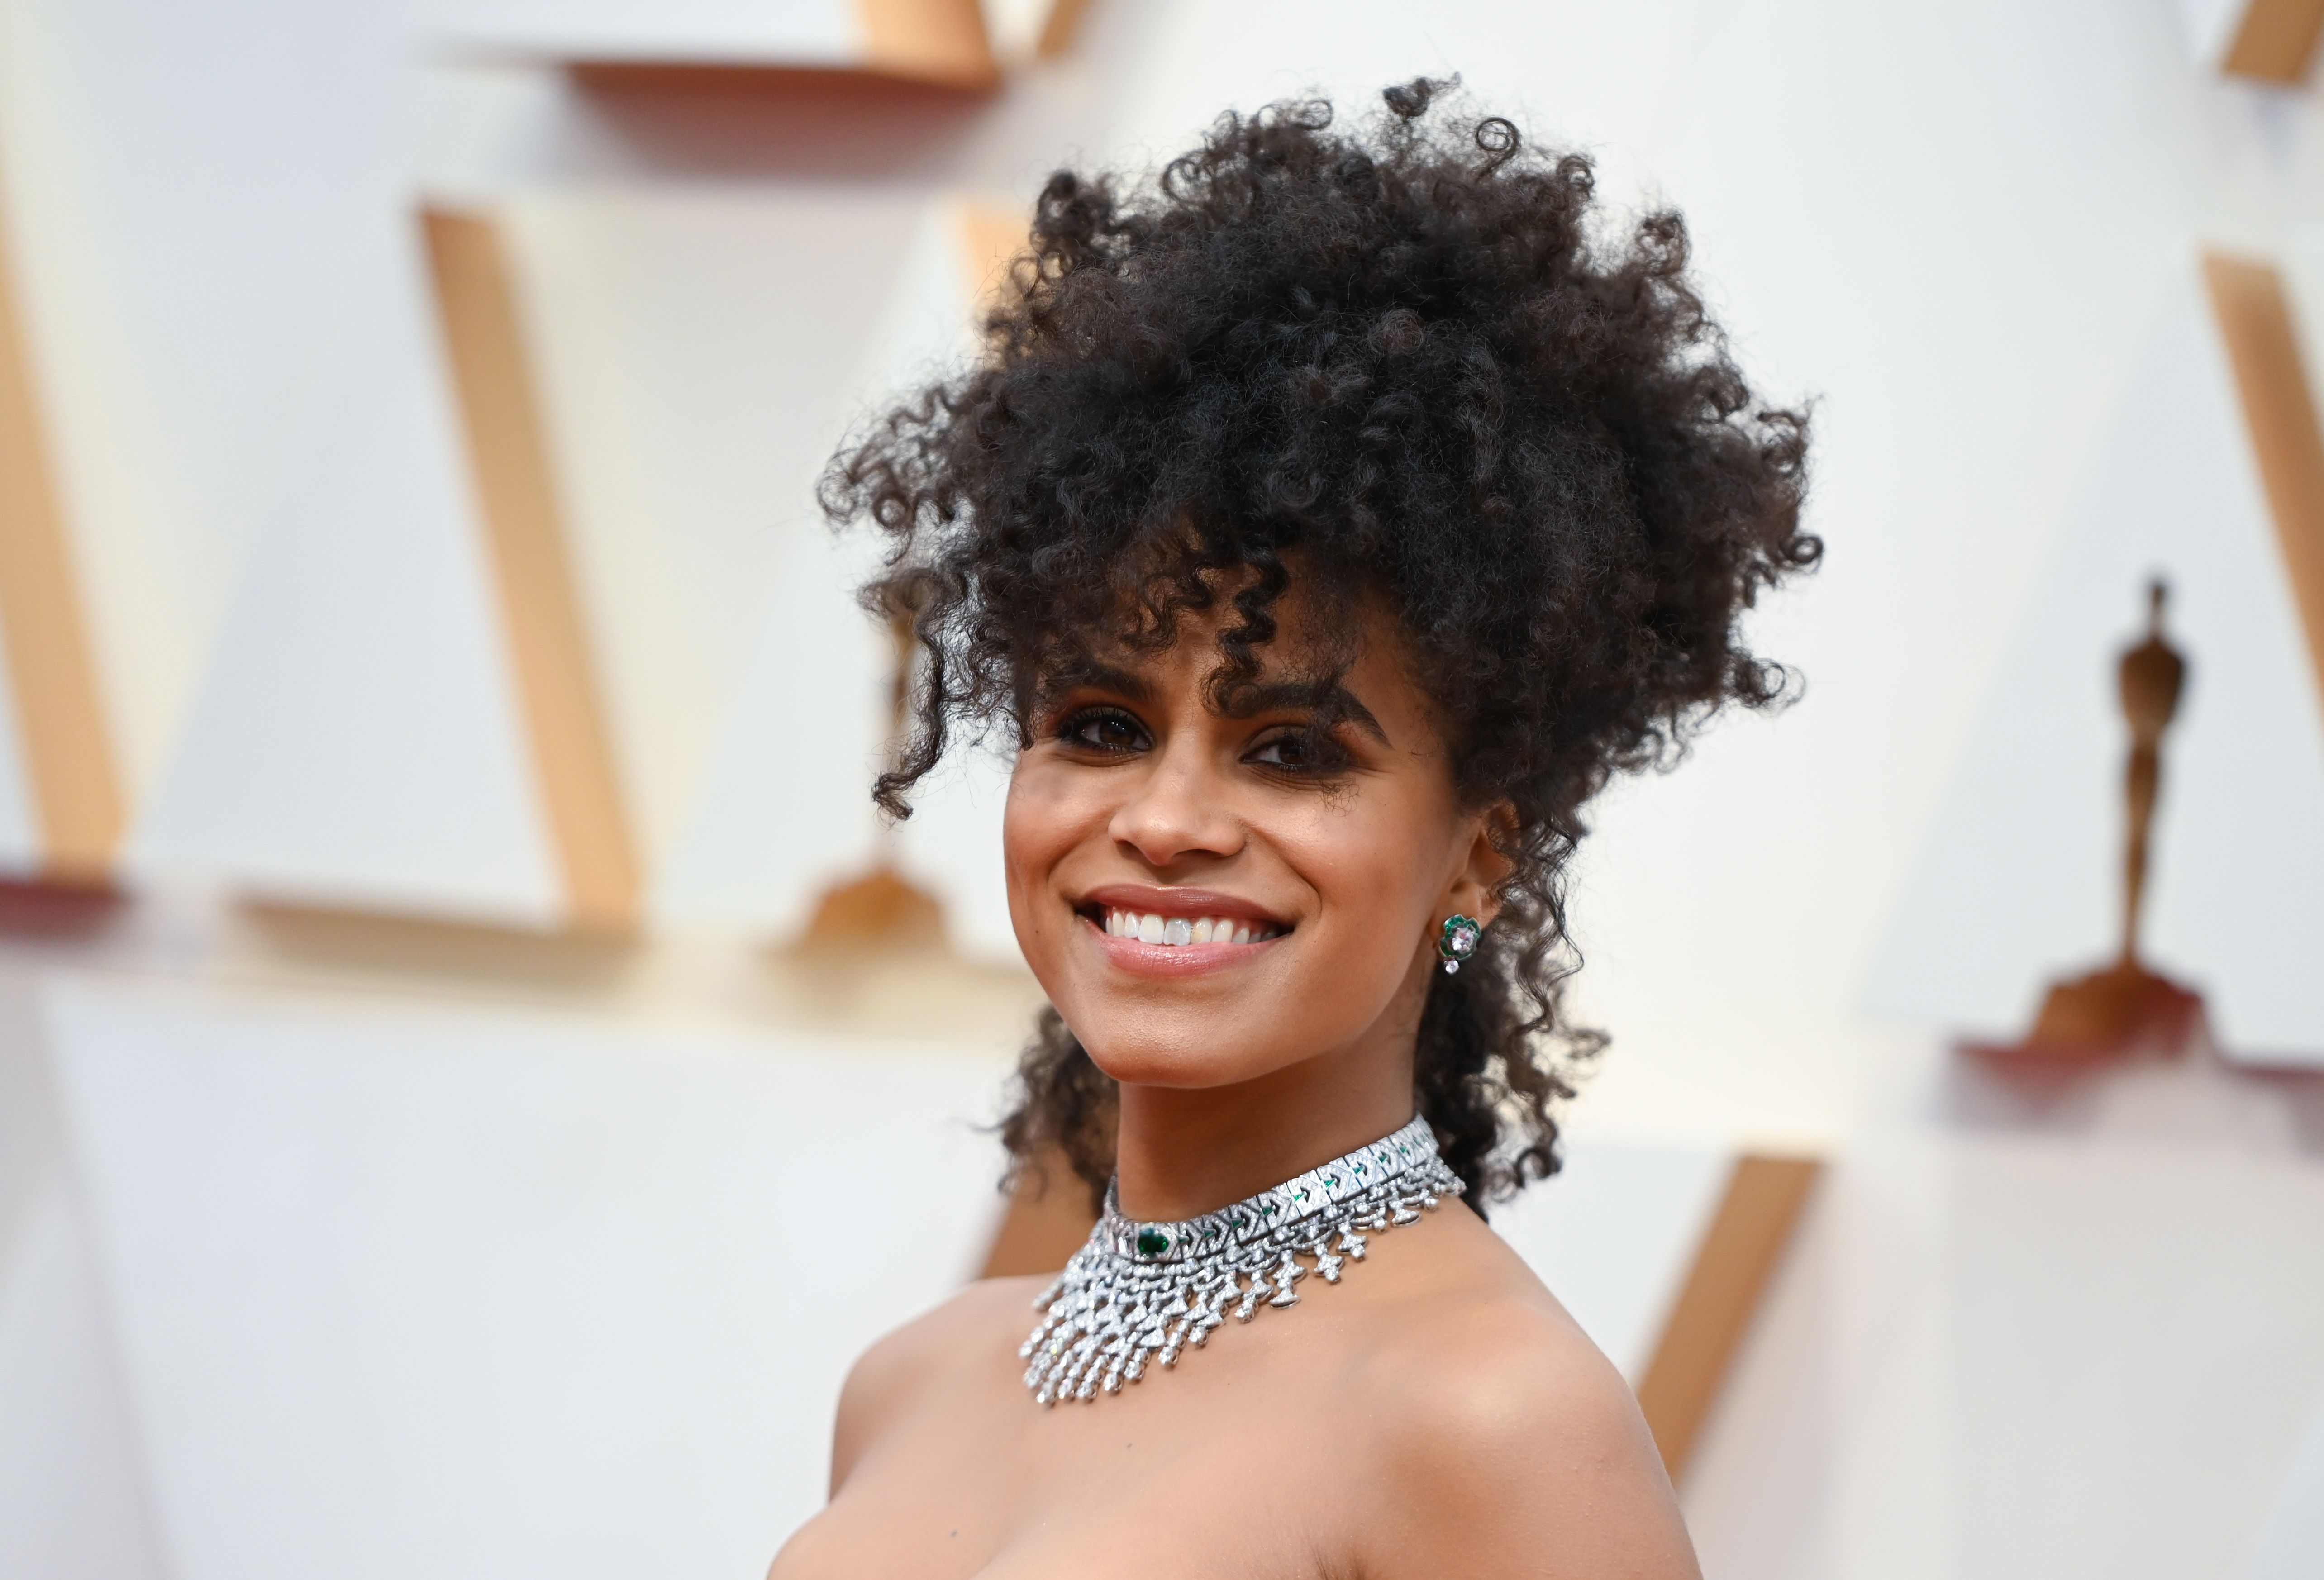 14 Best Hair Makeup And Beauty Looks From The Oscars 2020